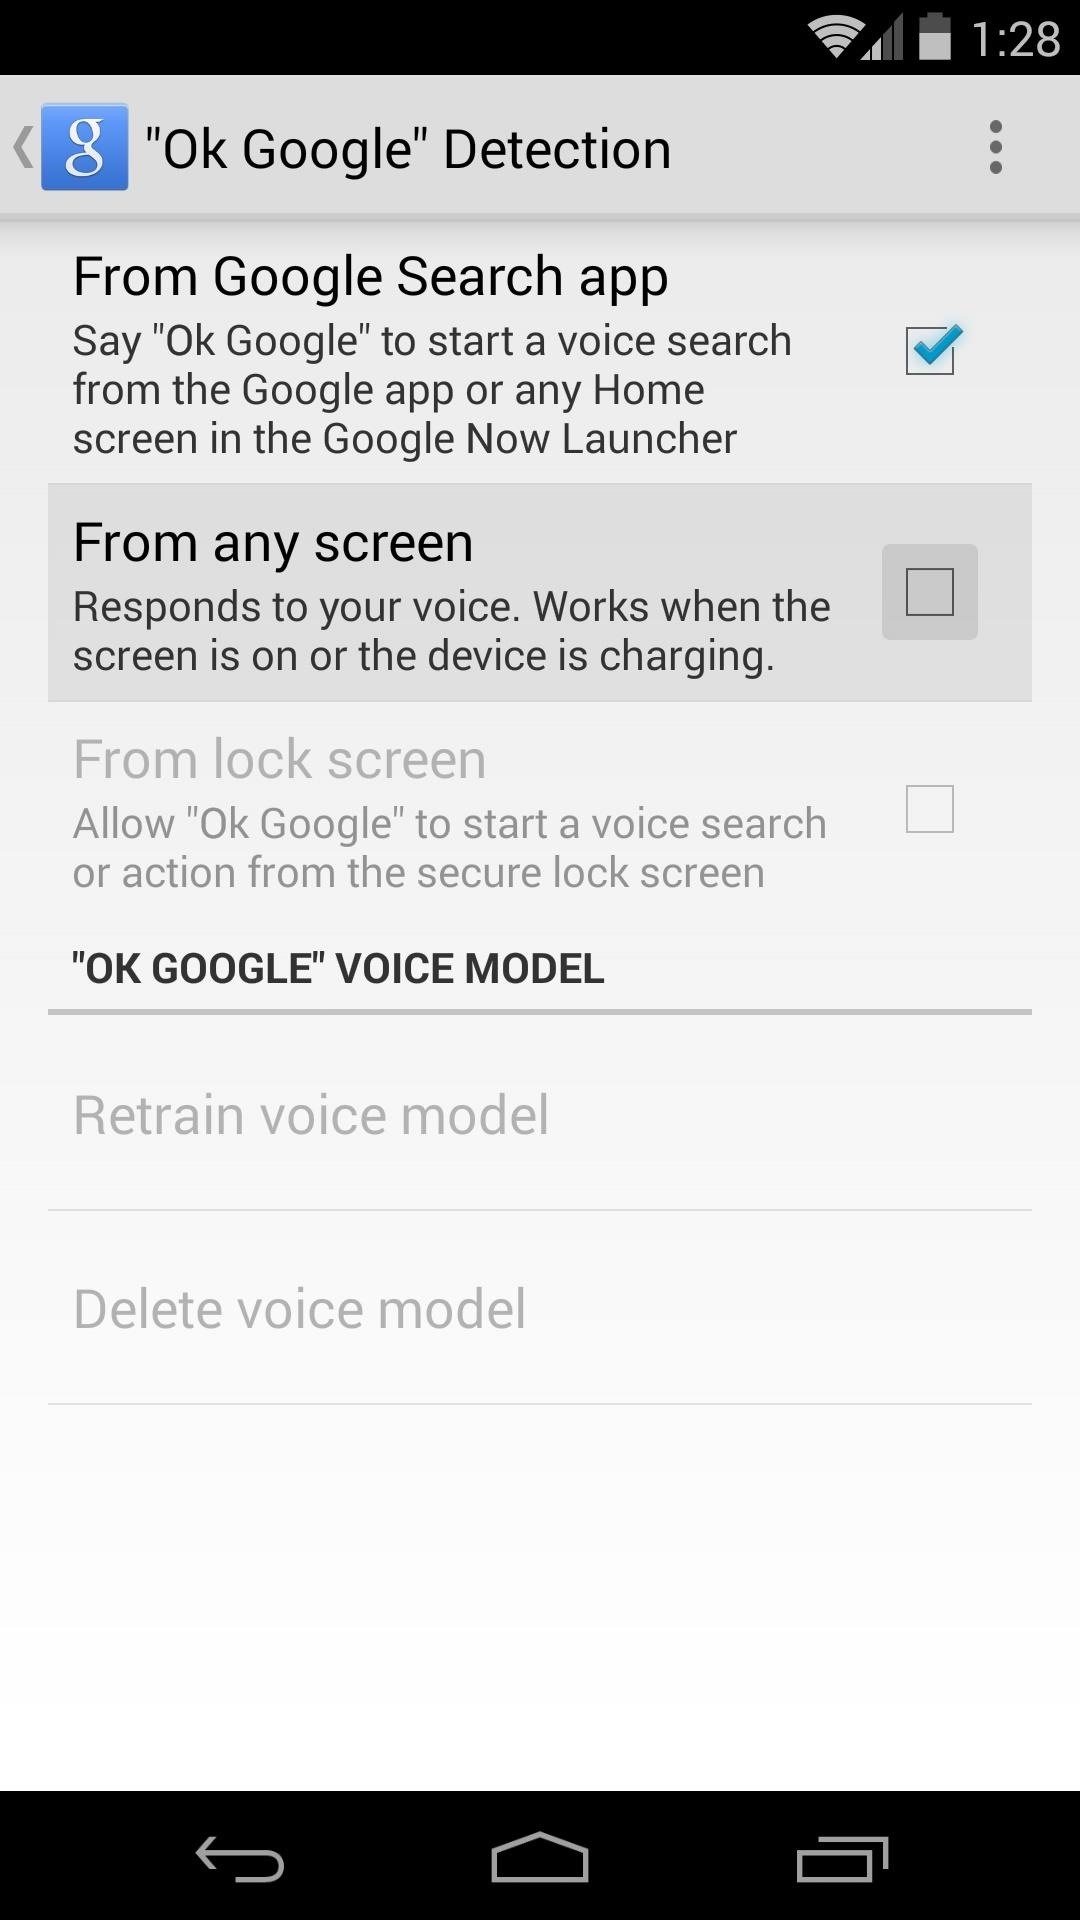 How to Enable "OK, Google" Hotword Detection on Any Screen in Android KitKat